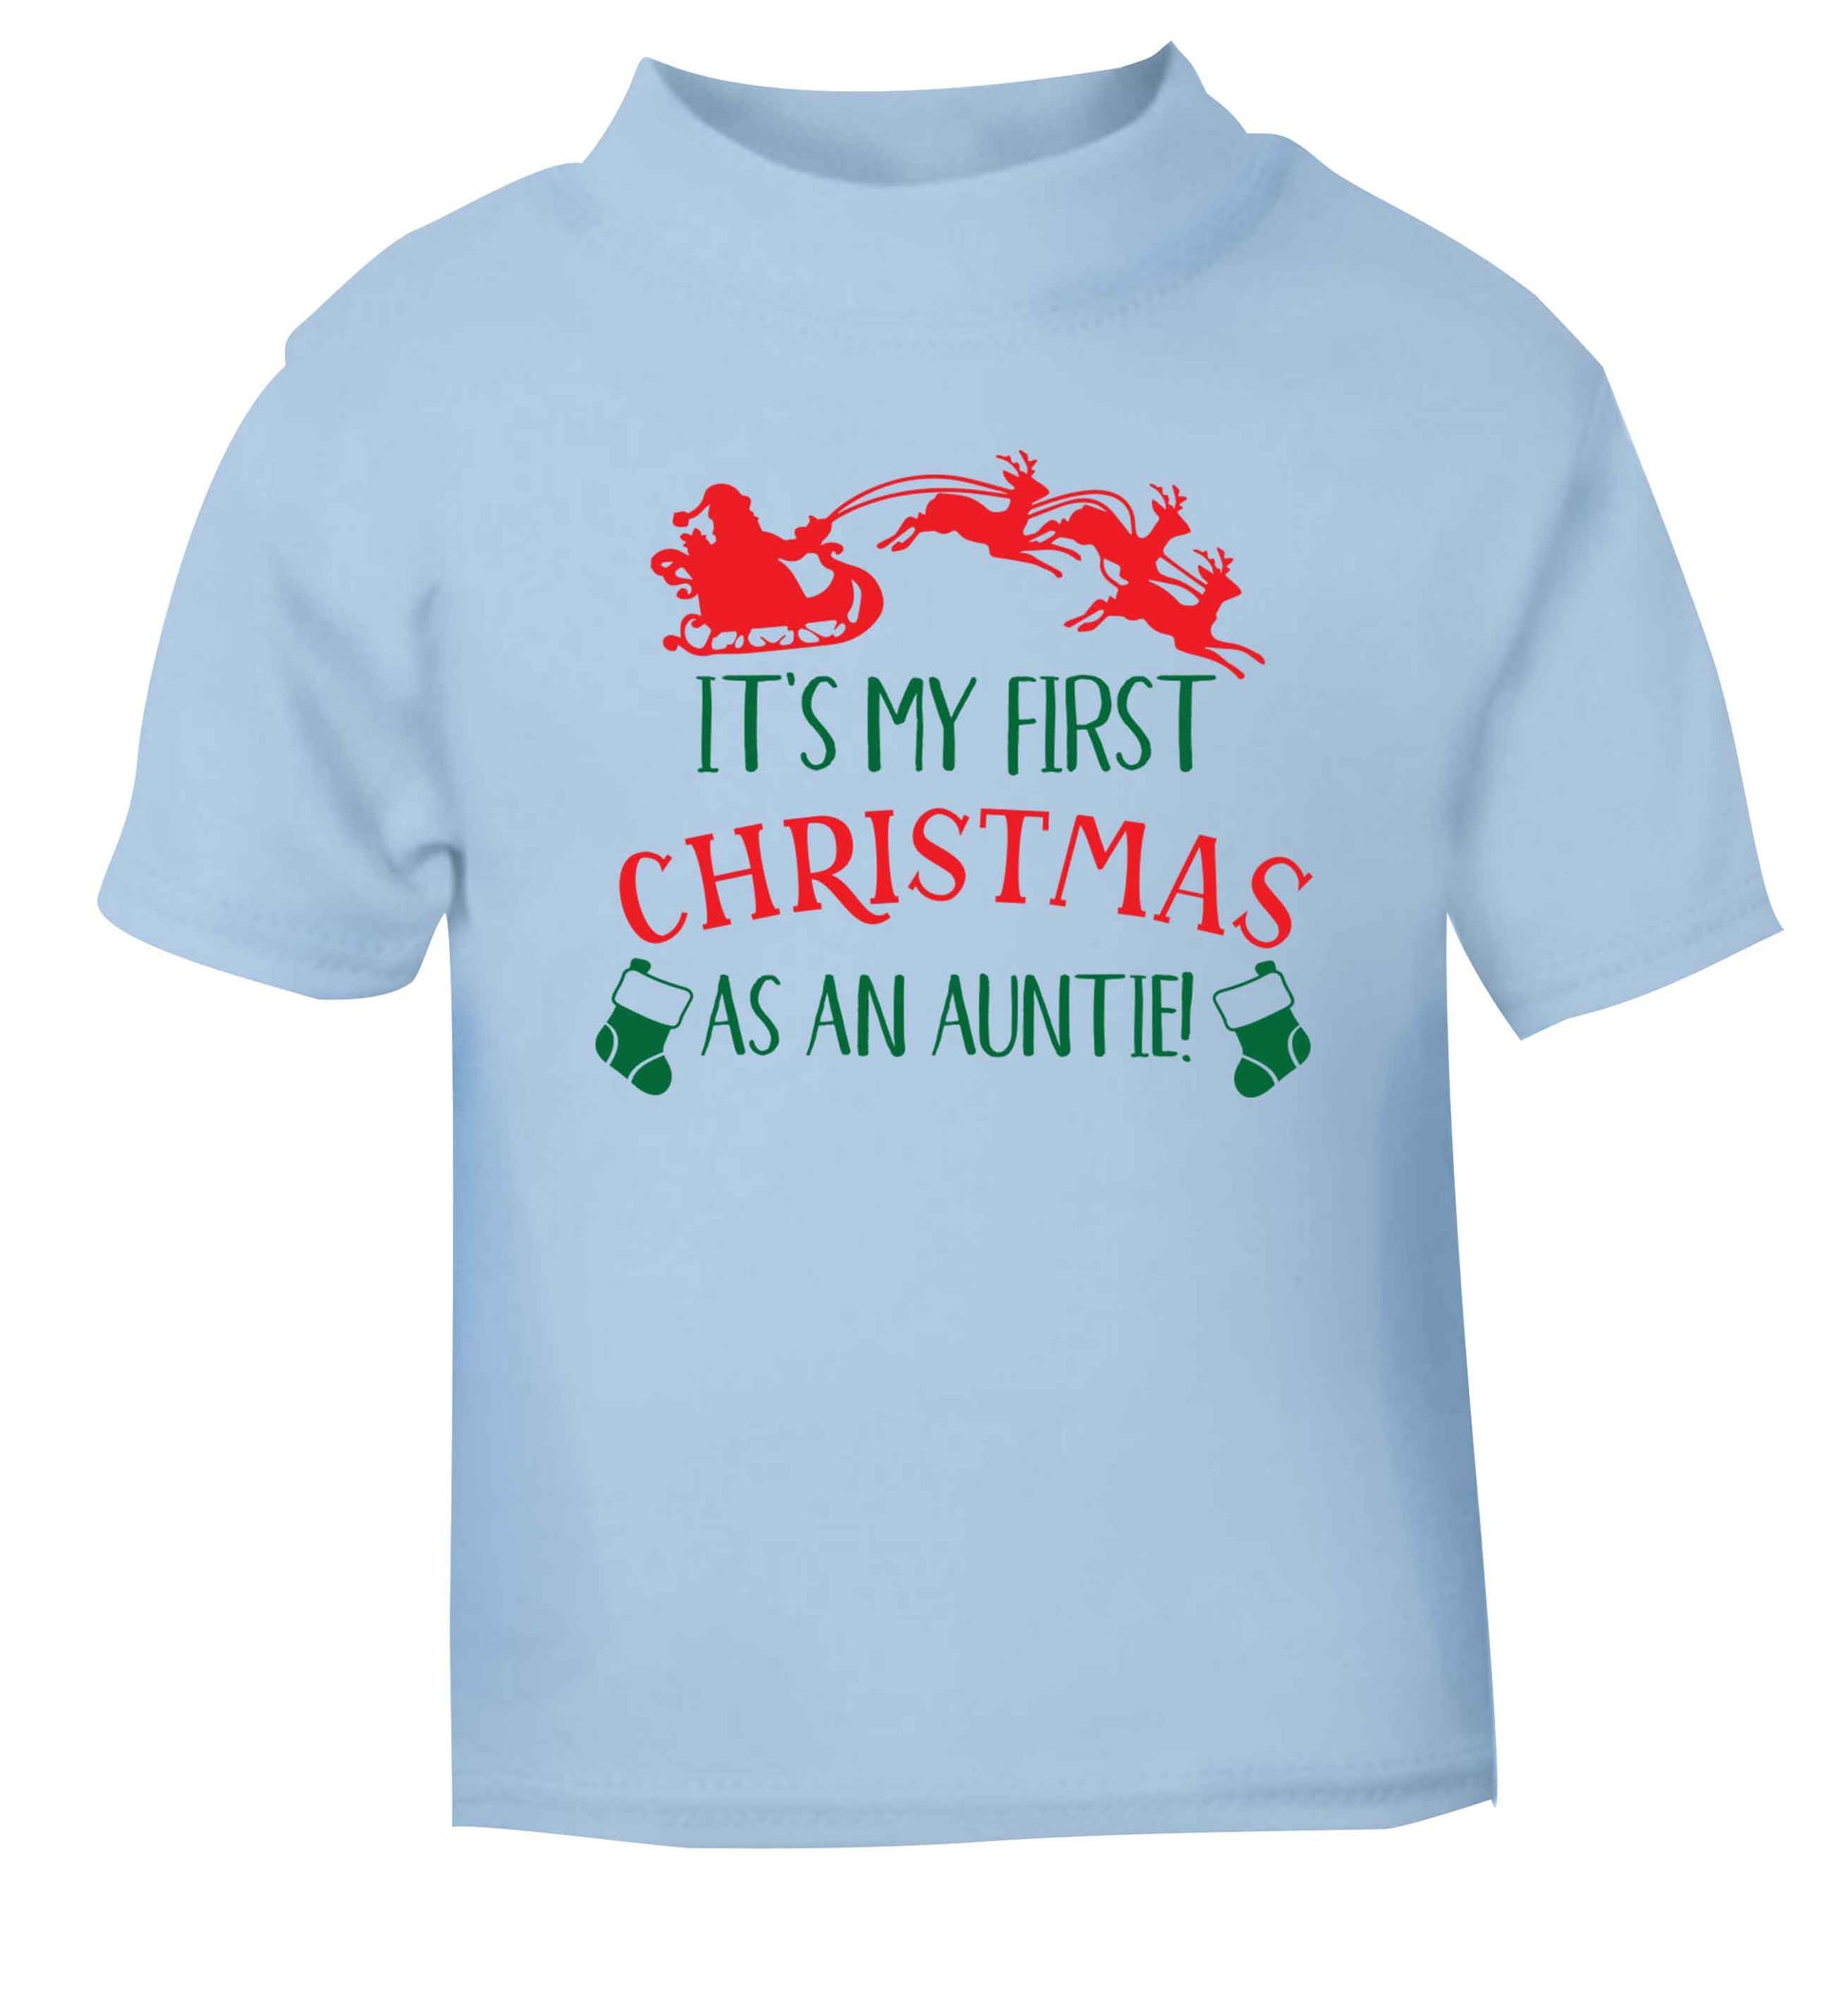 It's my first Christmas as an auntie! light blue Baby Toddler Tshirt 2 Years